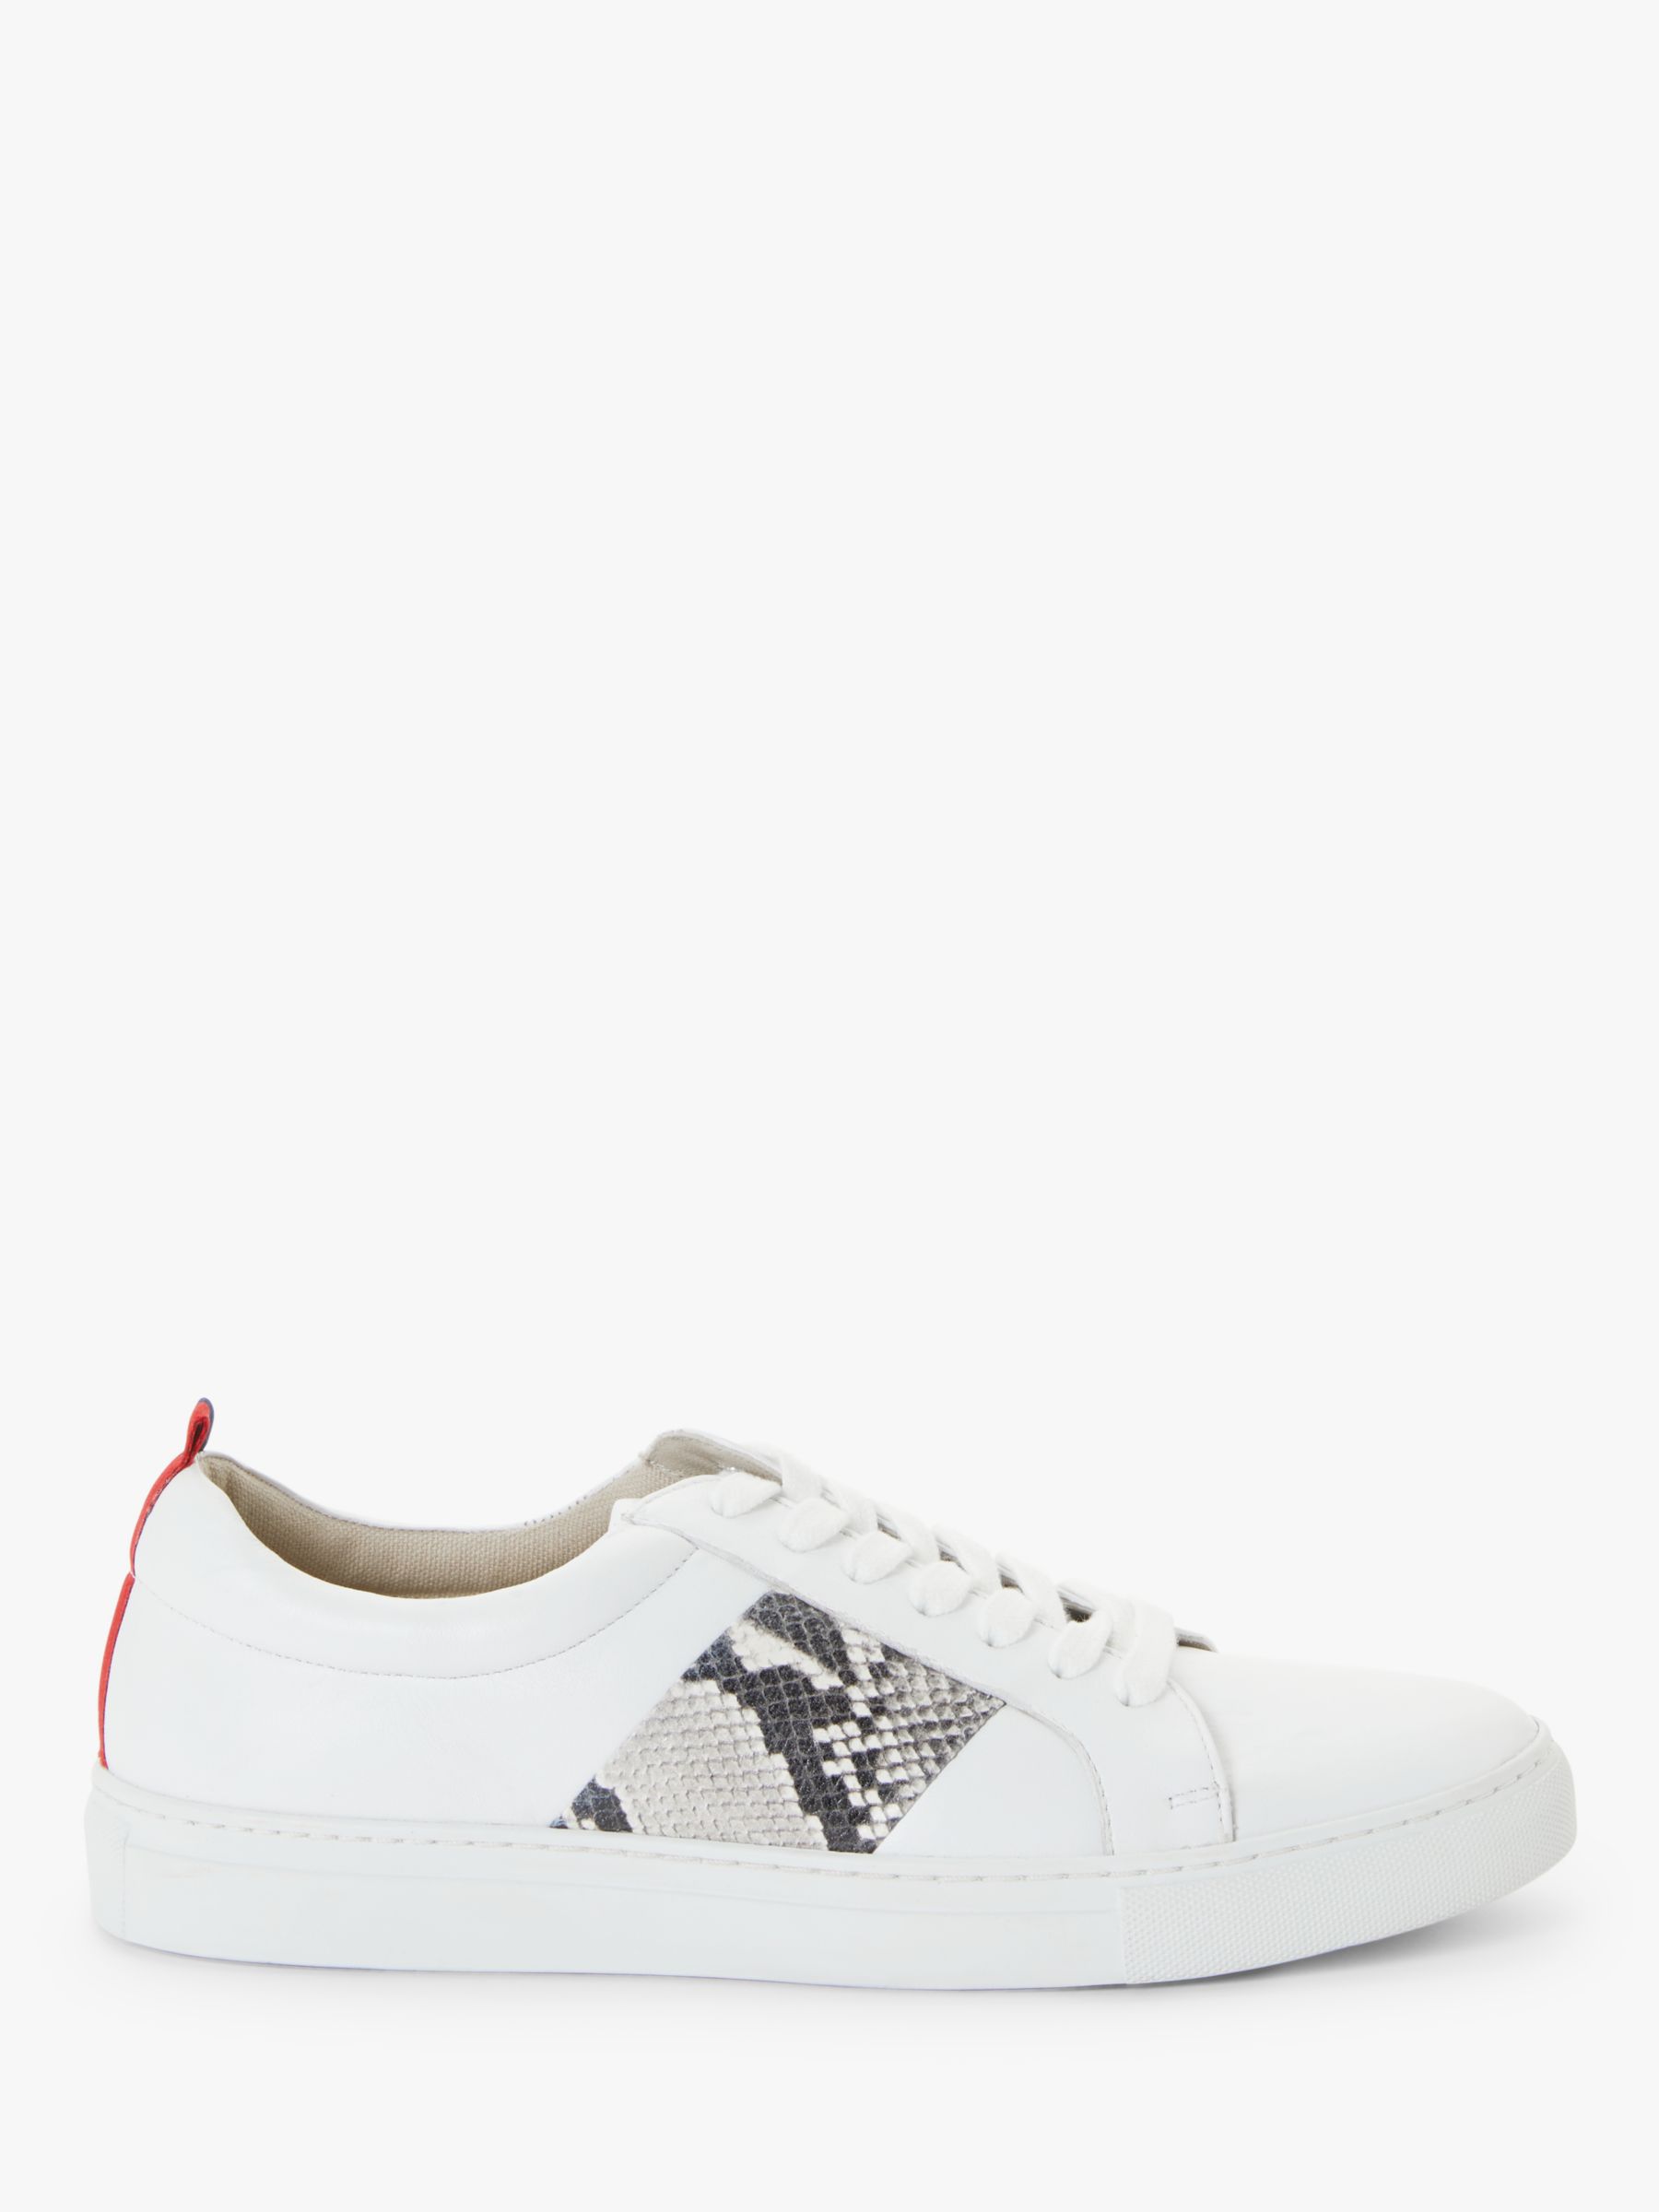 Boden Classic Leather Trainers